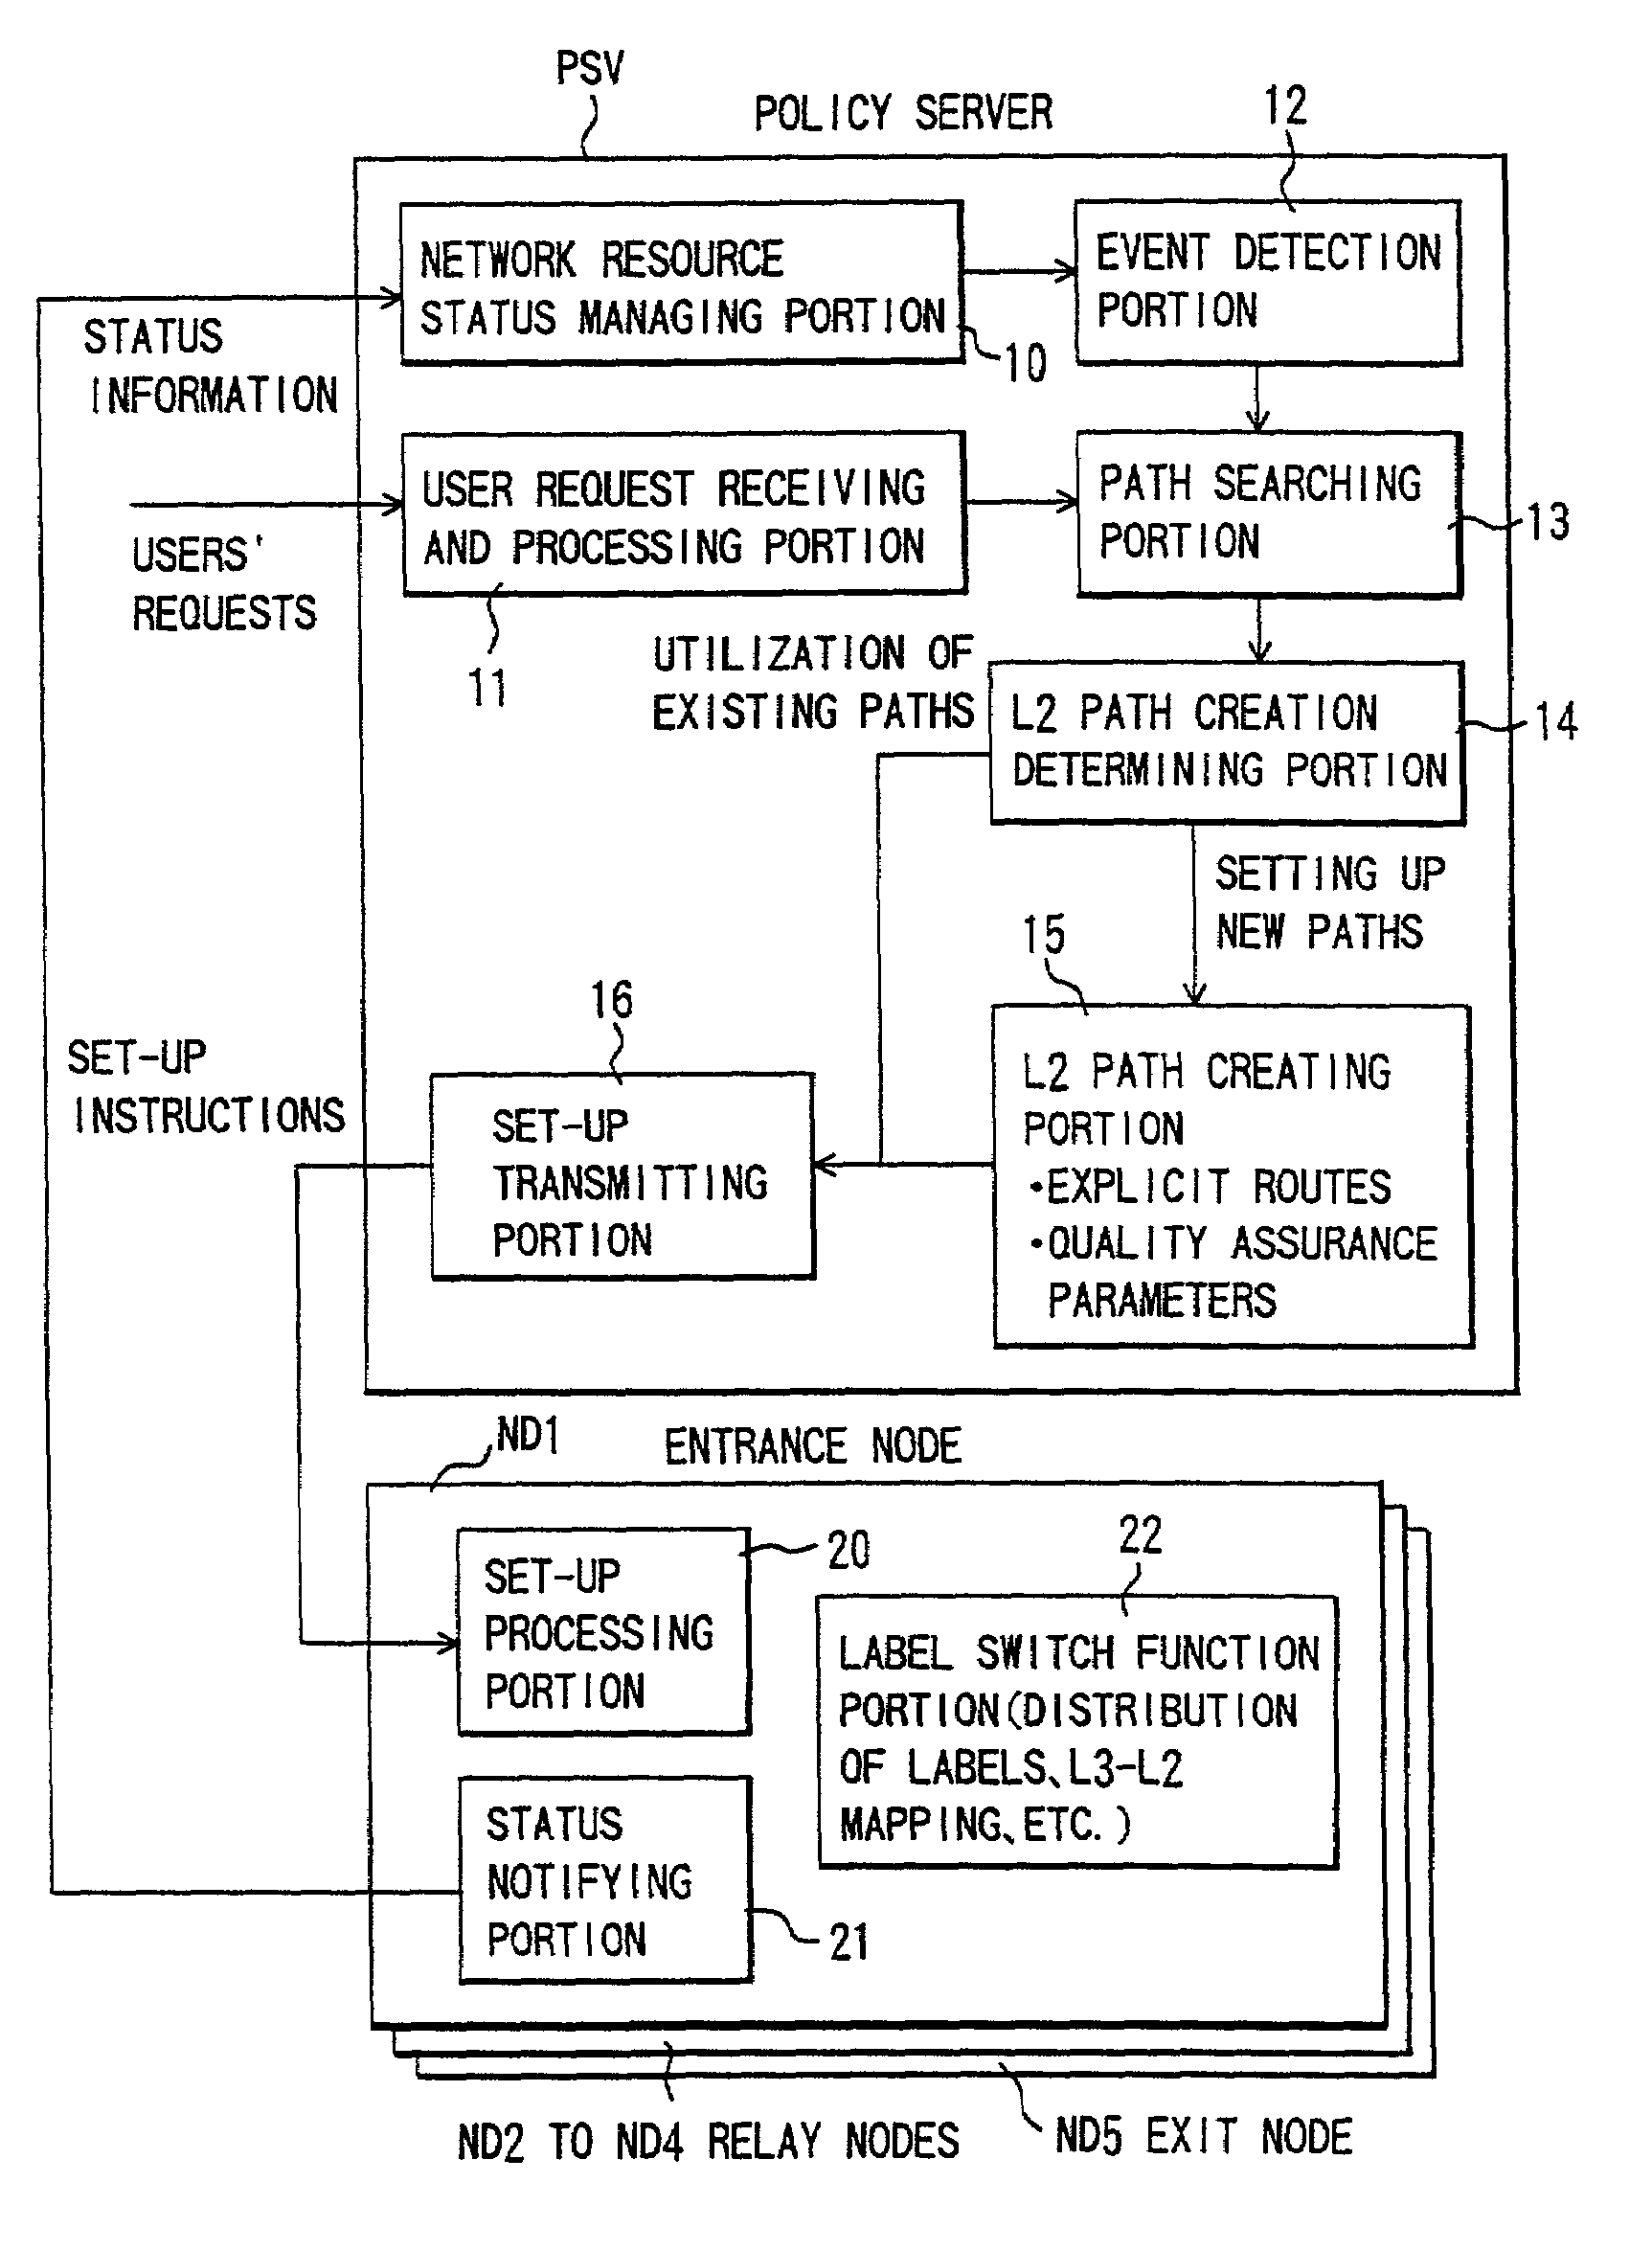 Label switch network system